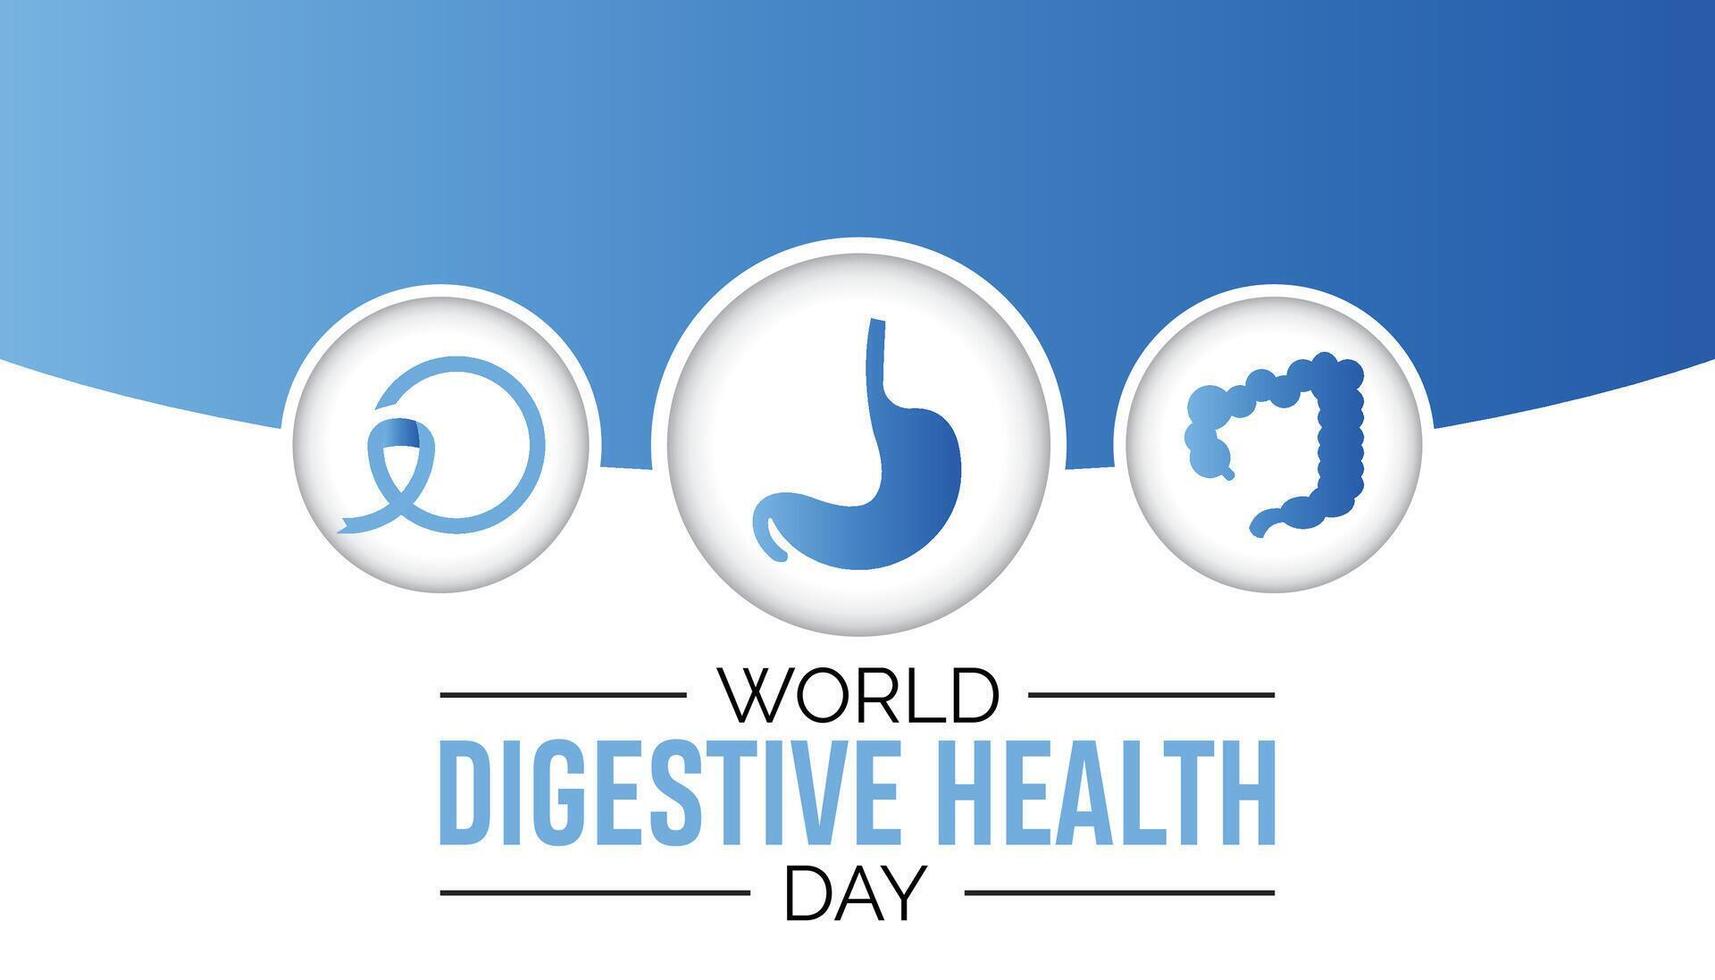 World Digestive Health Day observed every year in May 29. Template for background, banner, card, poster with text inscription. vector